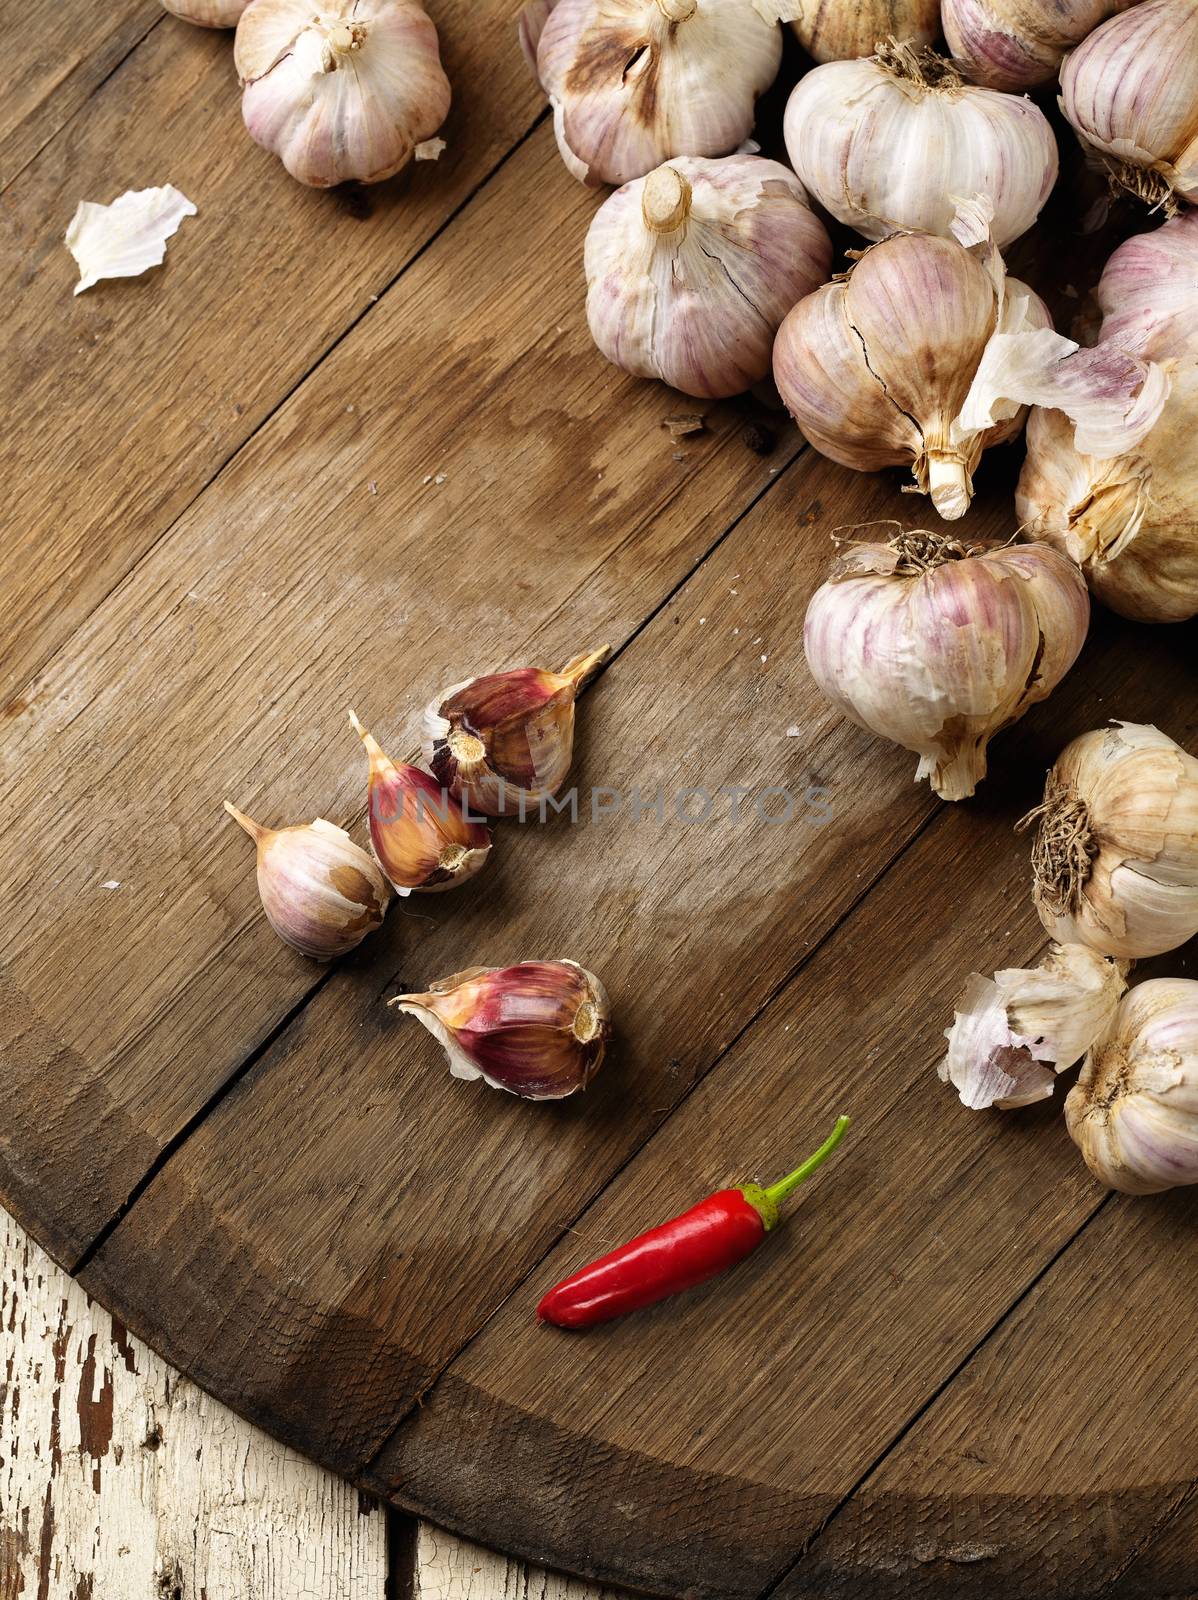 Garlic and red hot papper are natural drugs